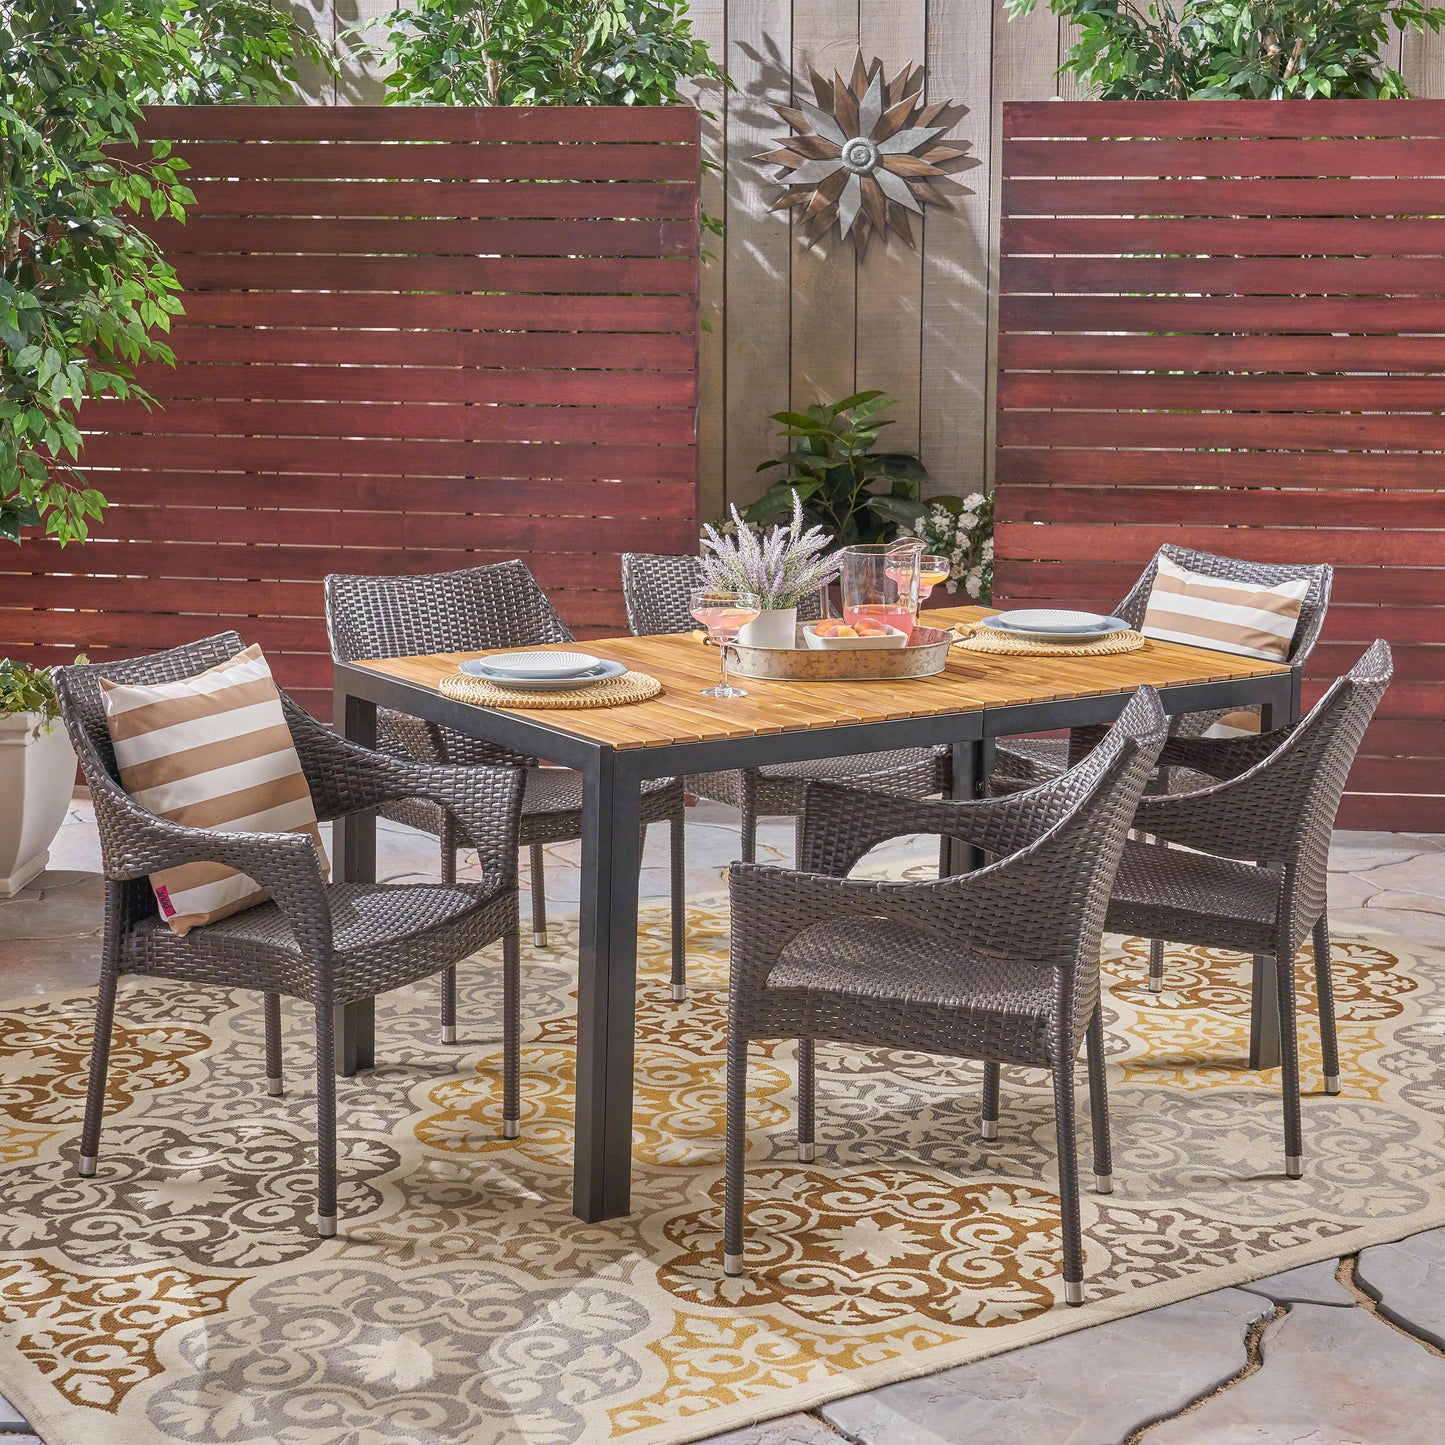 Hermosa Outdoor 6-Seater Rectangular Acacia Wood and Wicker Dining Set, Teak with Black and Multi Brown